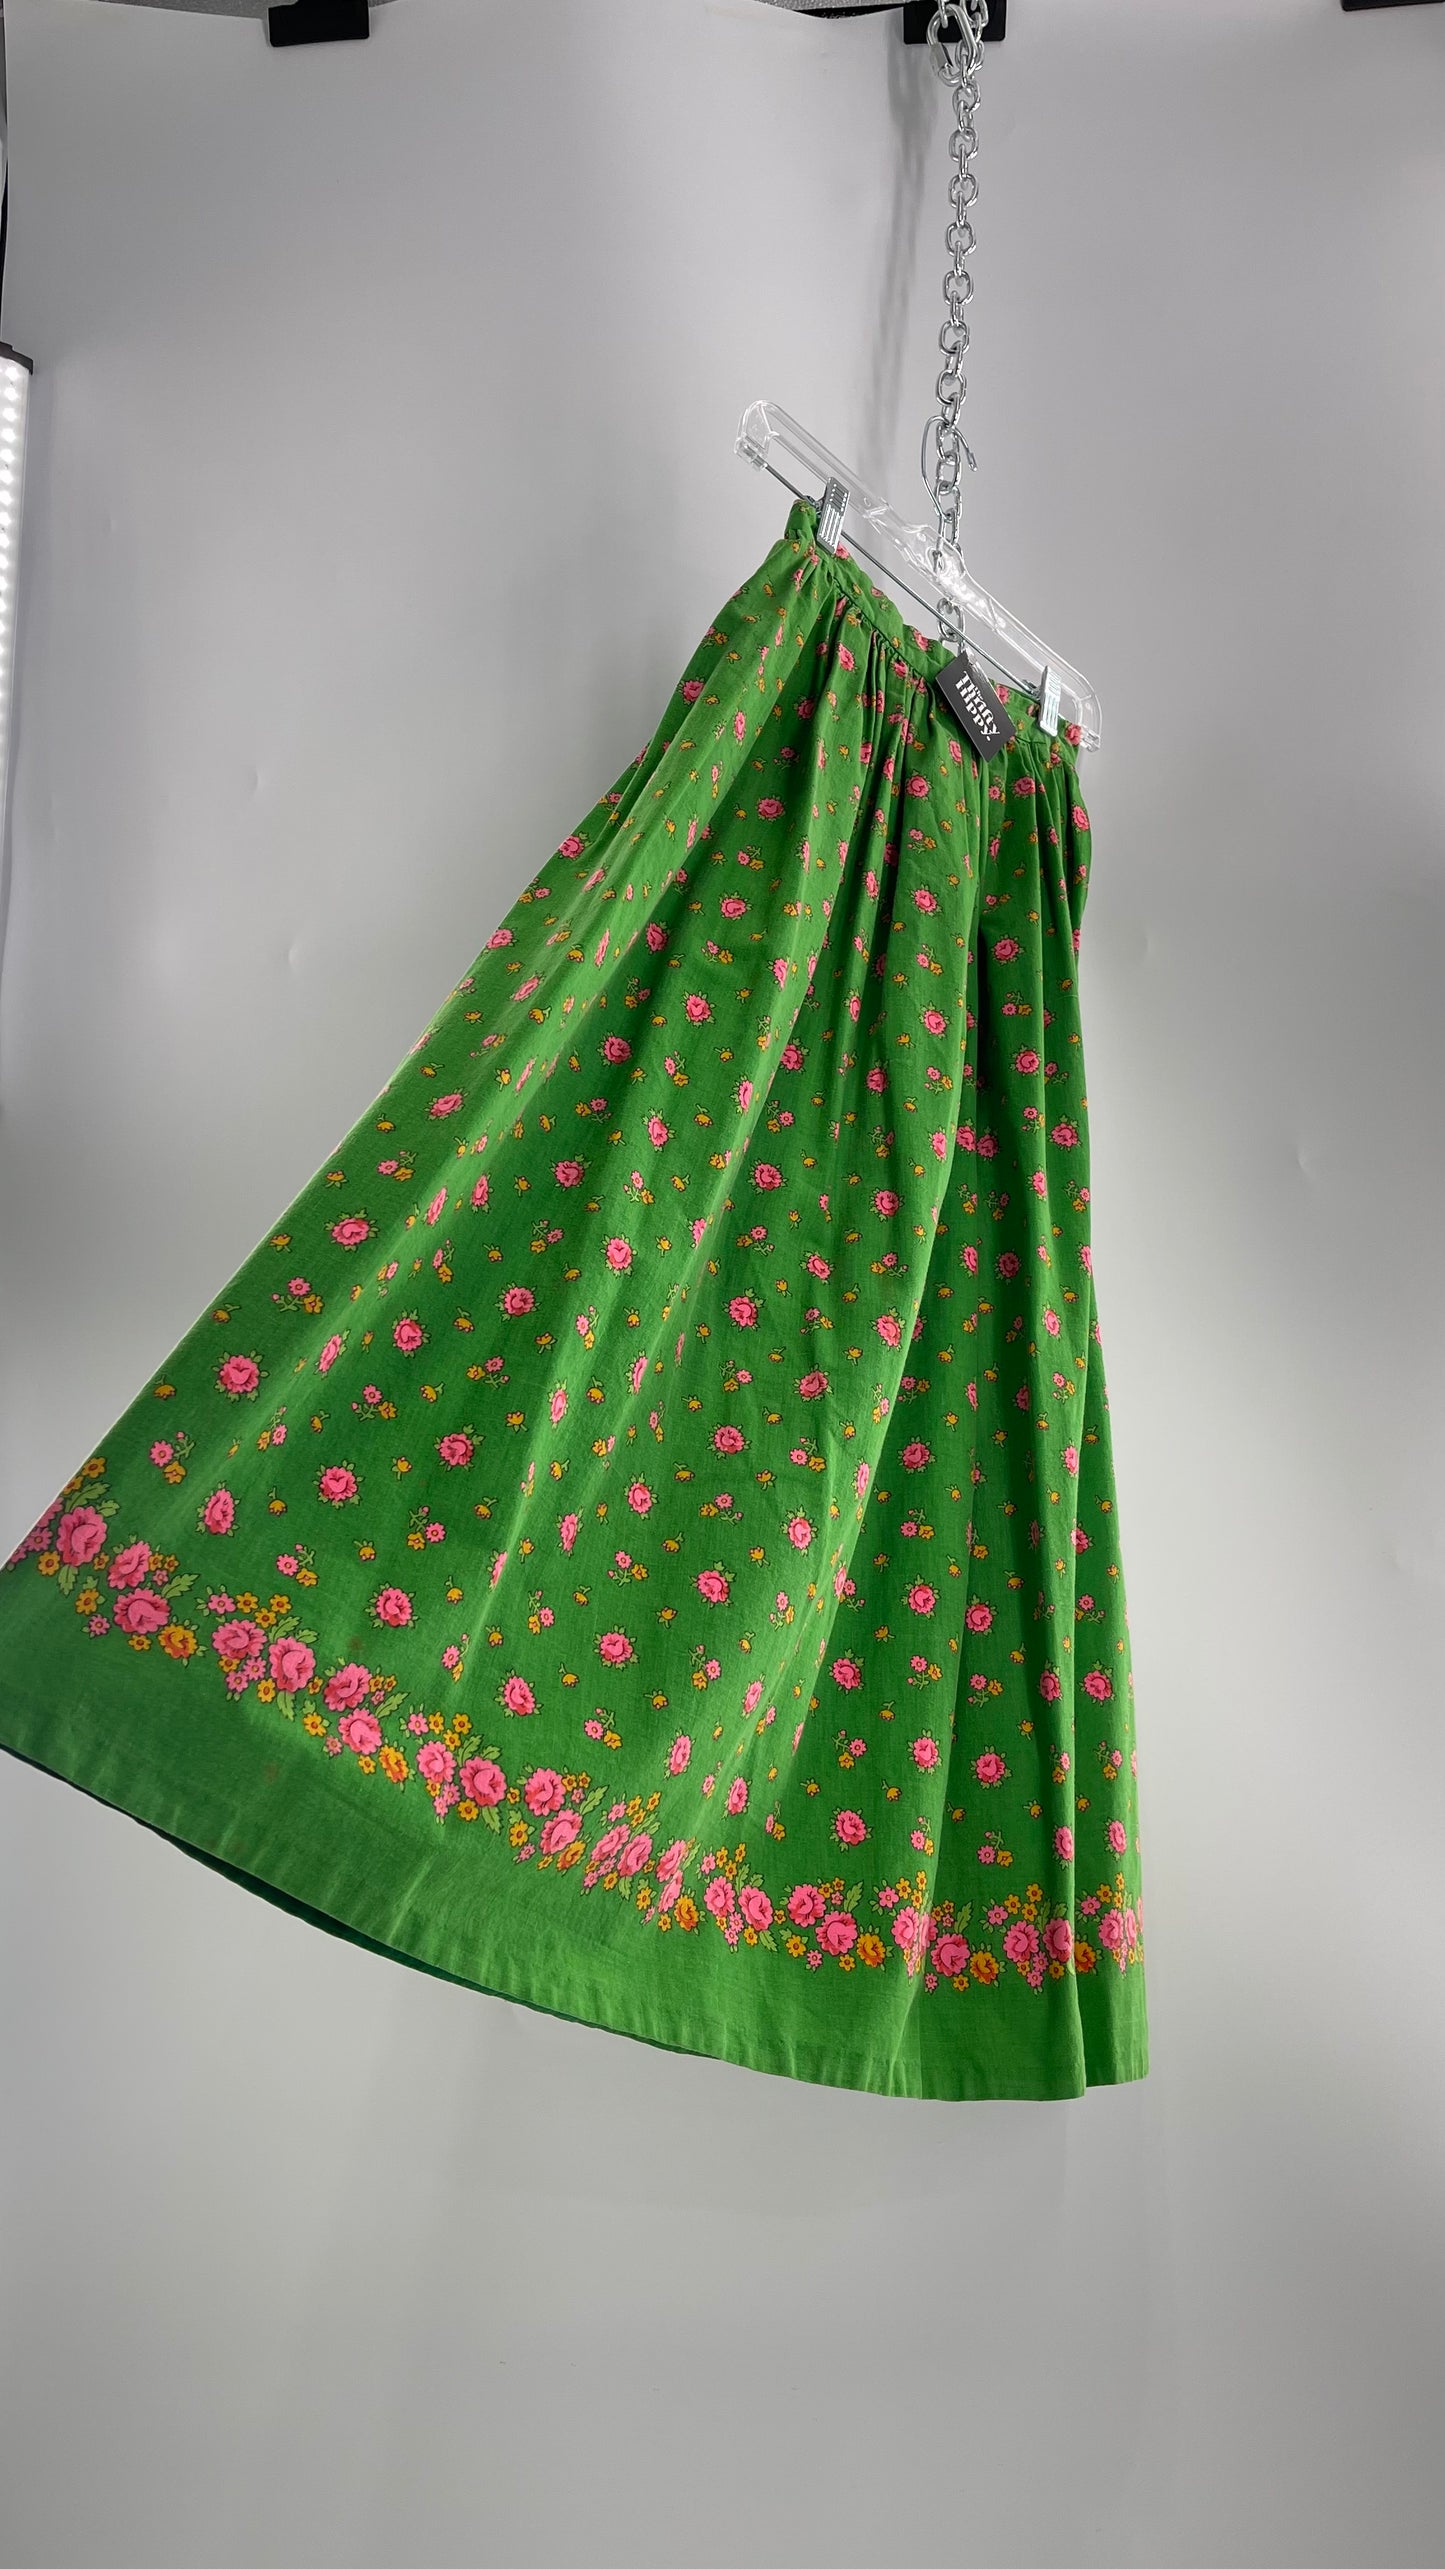 Vintage Imported Cotton Kelly Green Skirt with Pink Roses (XS)